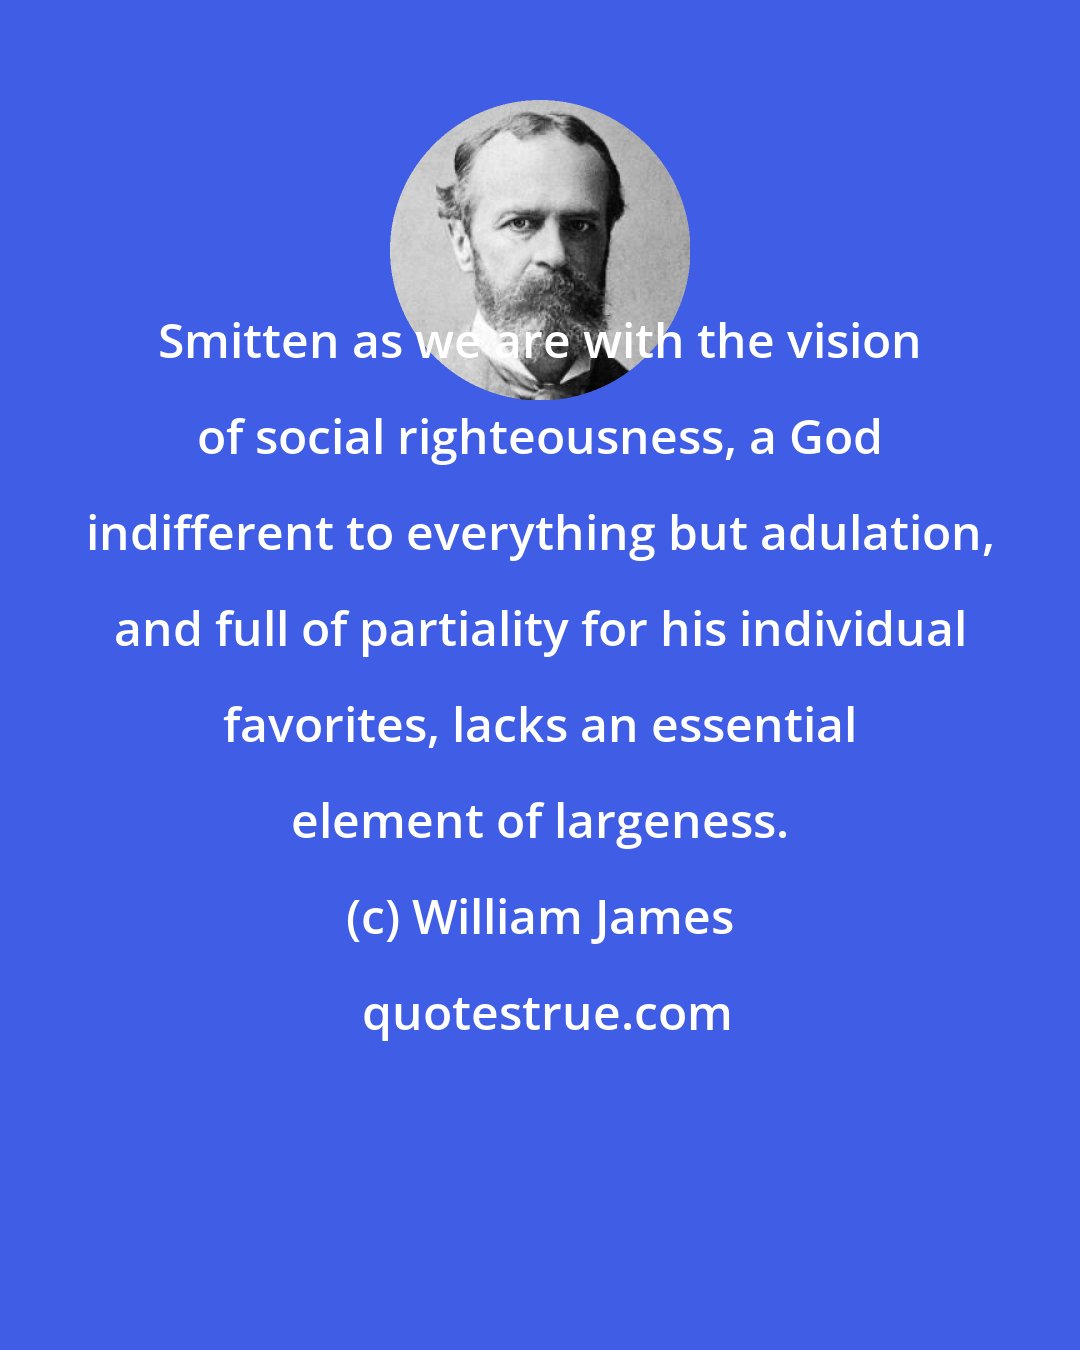 William James: Smitten as we are with the vision of social righteousness, a God indifferent to everything but adulation, and full of partiality for his individual favorites, lacks an essential element of largeness.